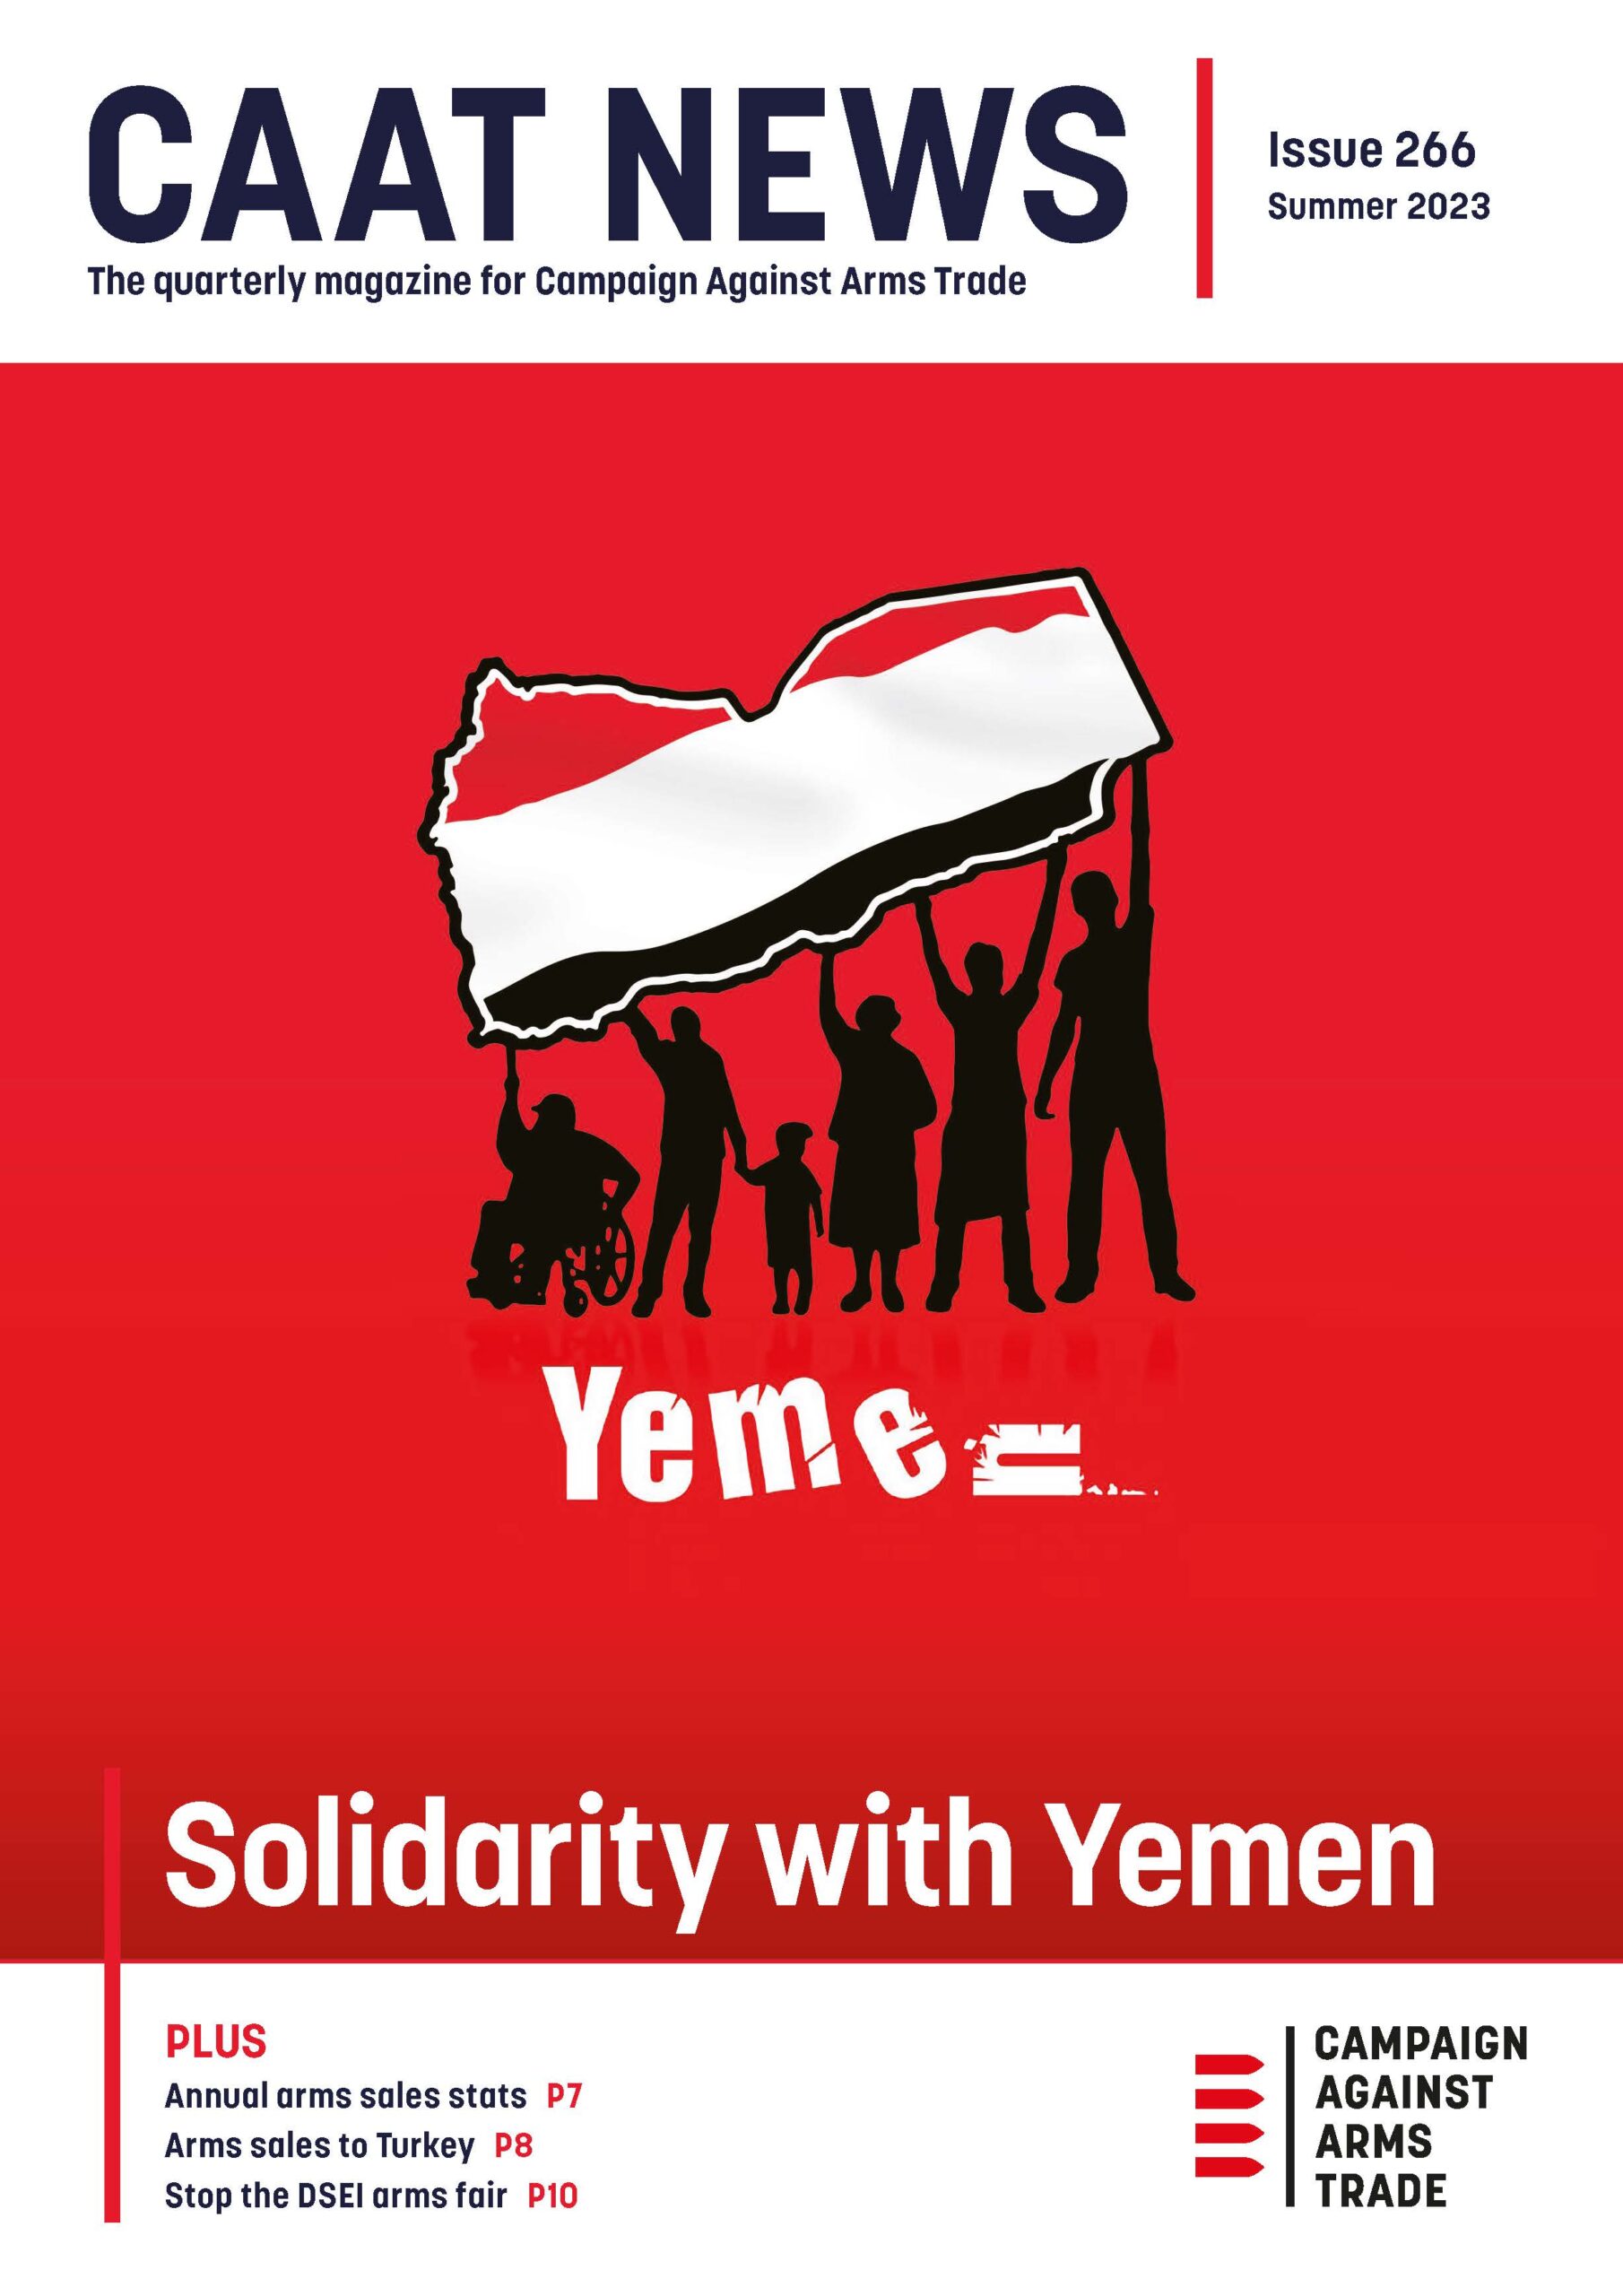 CAAT News 266 cover image. Image of silhouetted figures, one in wheelchair, holding up outline of Yemen in flag colours, with text Yemen below in cracked letters with letter n on its side. Text at bottom Solidarity with Yemen